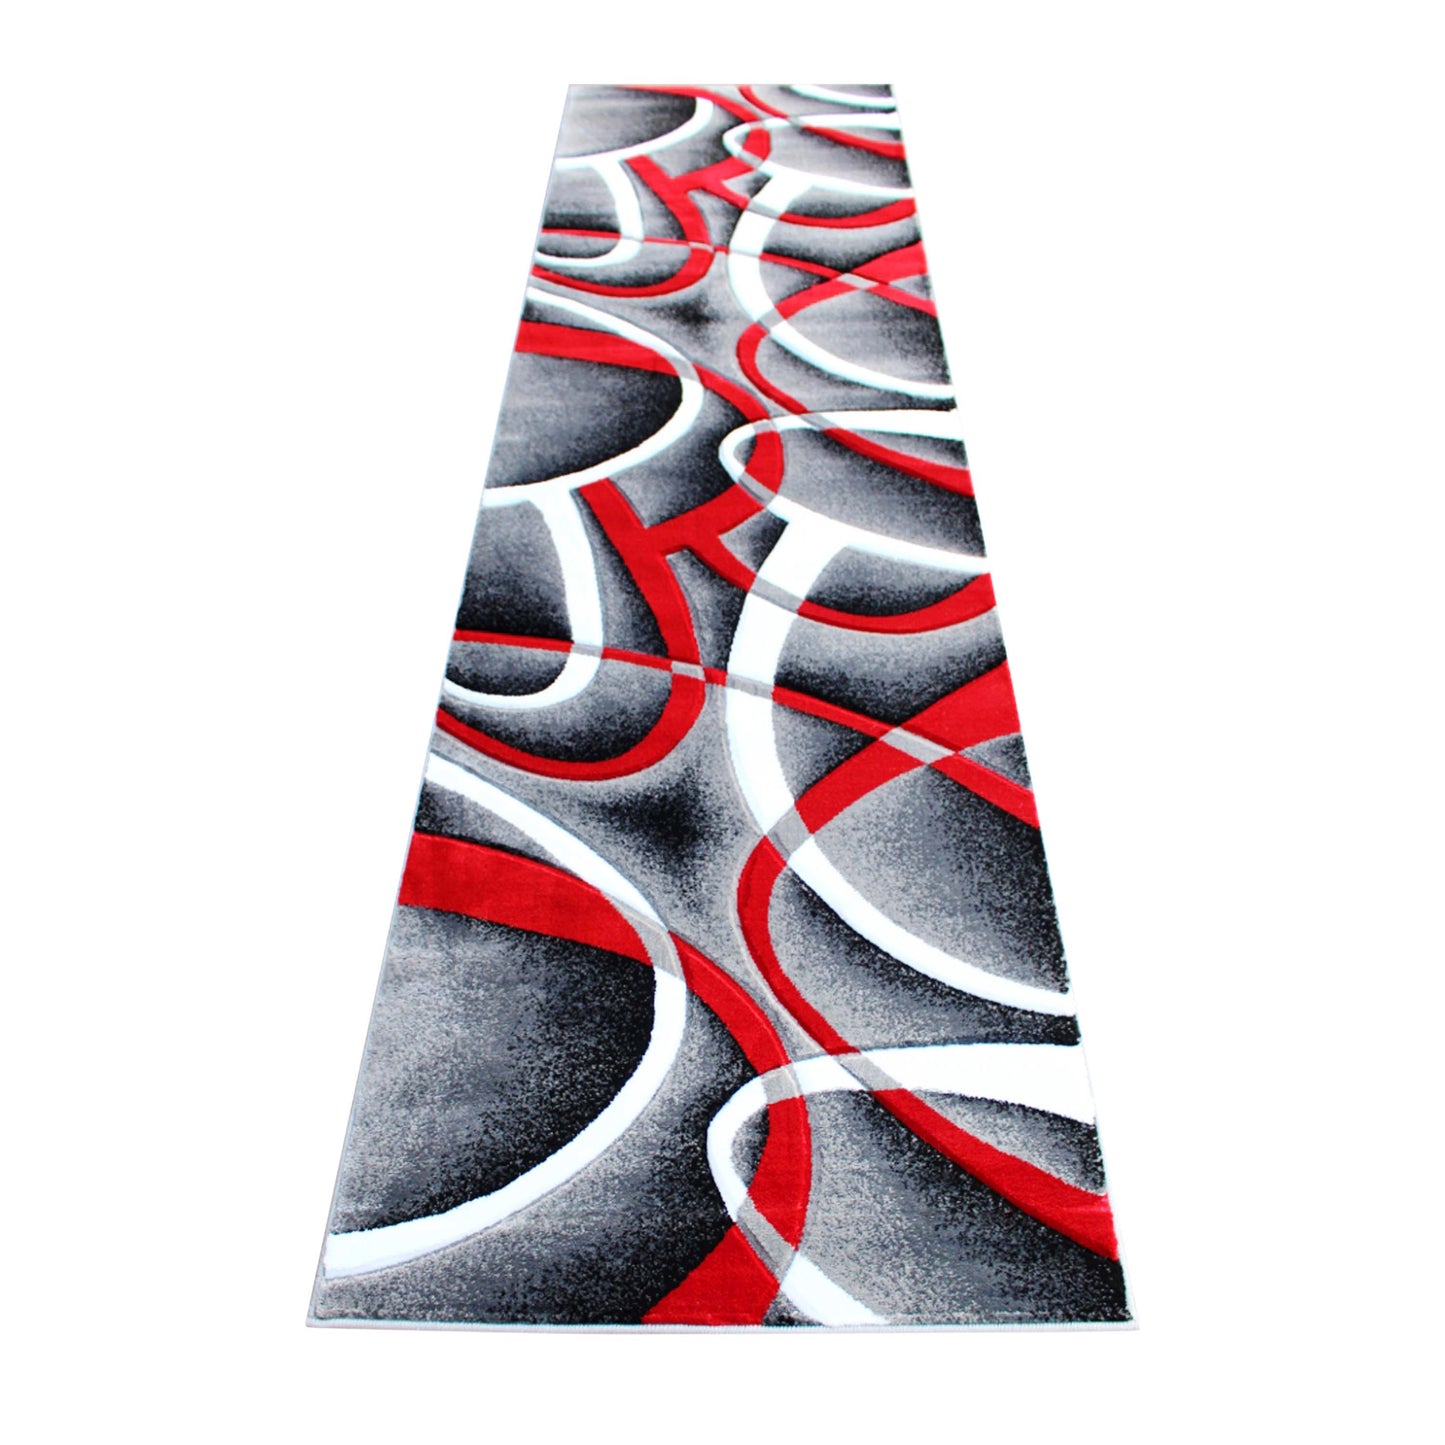 3x10 Red Abstract Rug KP-RG951-310-RD-GG